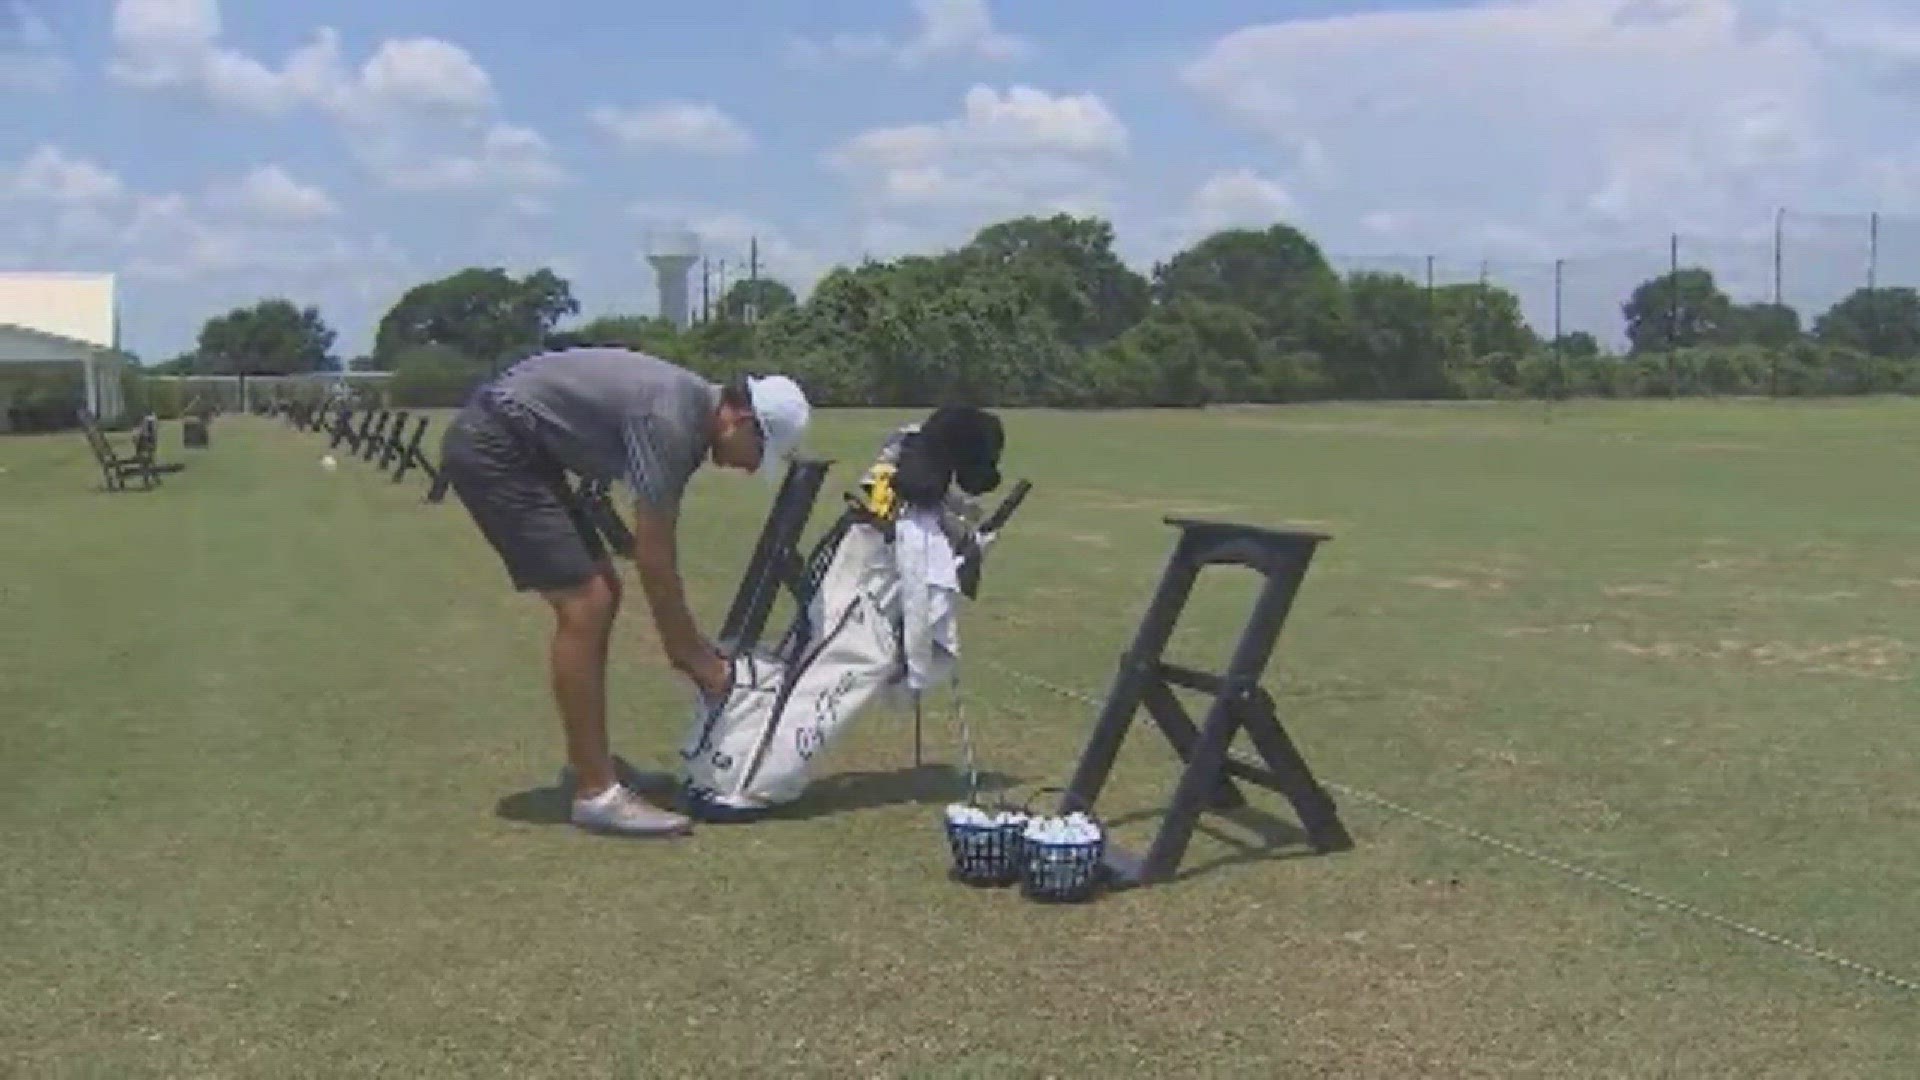 A soon to be Cy-Fair High School senior, Laurence Crea is the KHOU Athlete of the Week. He recently won a tournament at Eagle Point Golf Club. But he not only plays on the golf course, he also works there too.